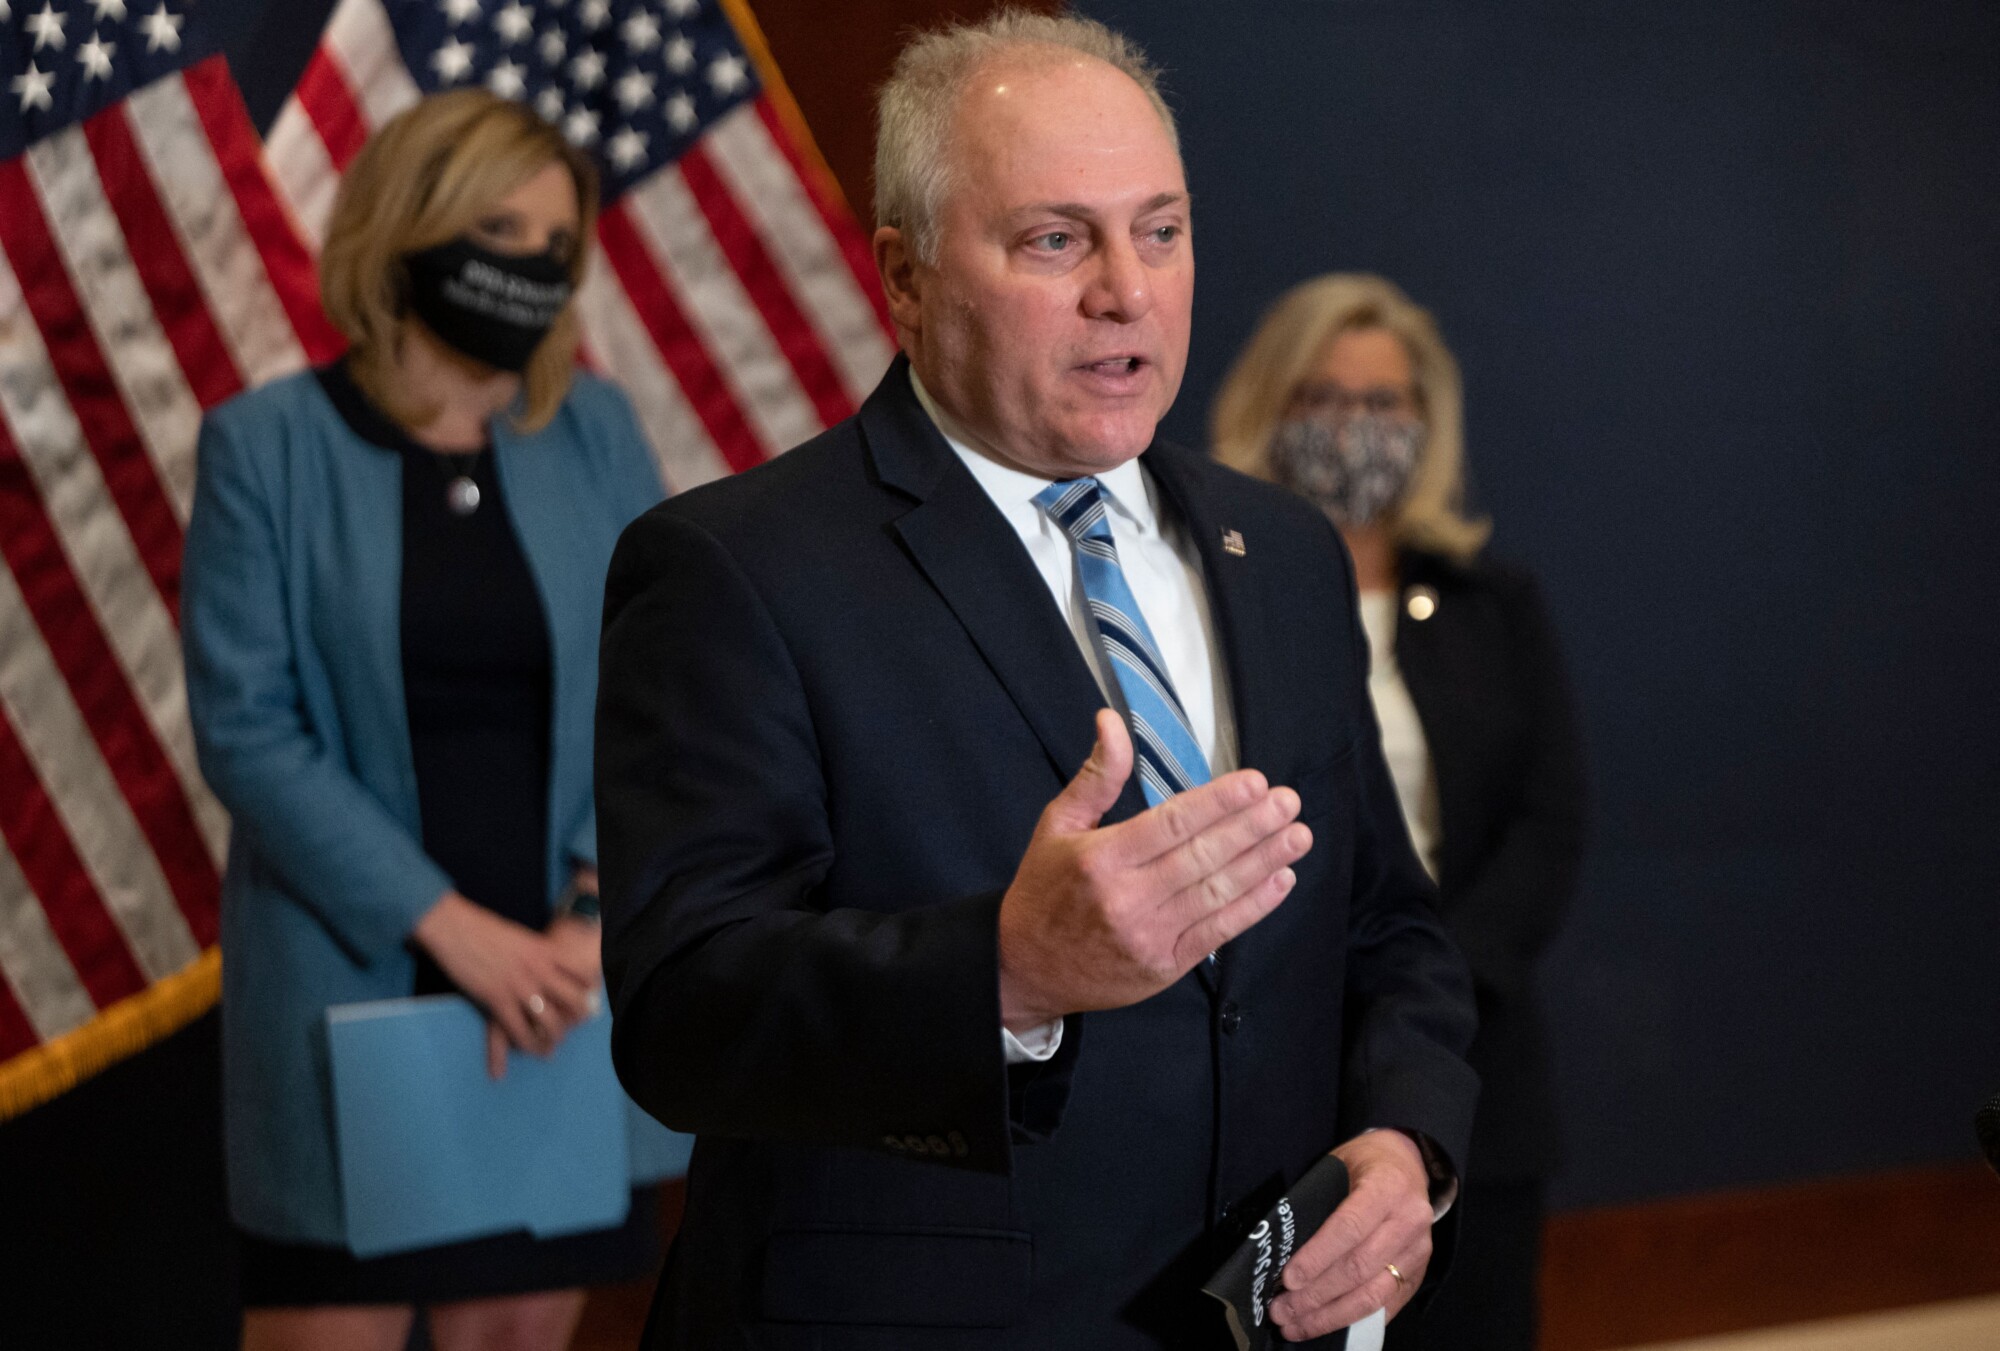 Rep. Scalise: Disabled Students Bear Greatest Burden During School Closures